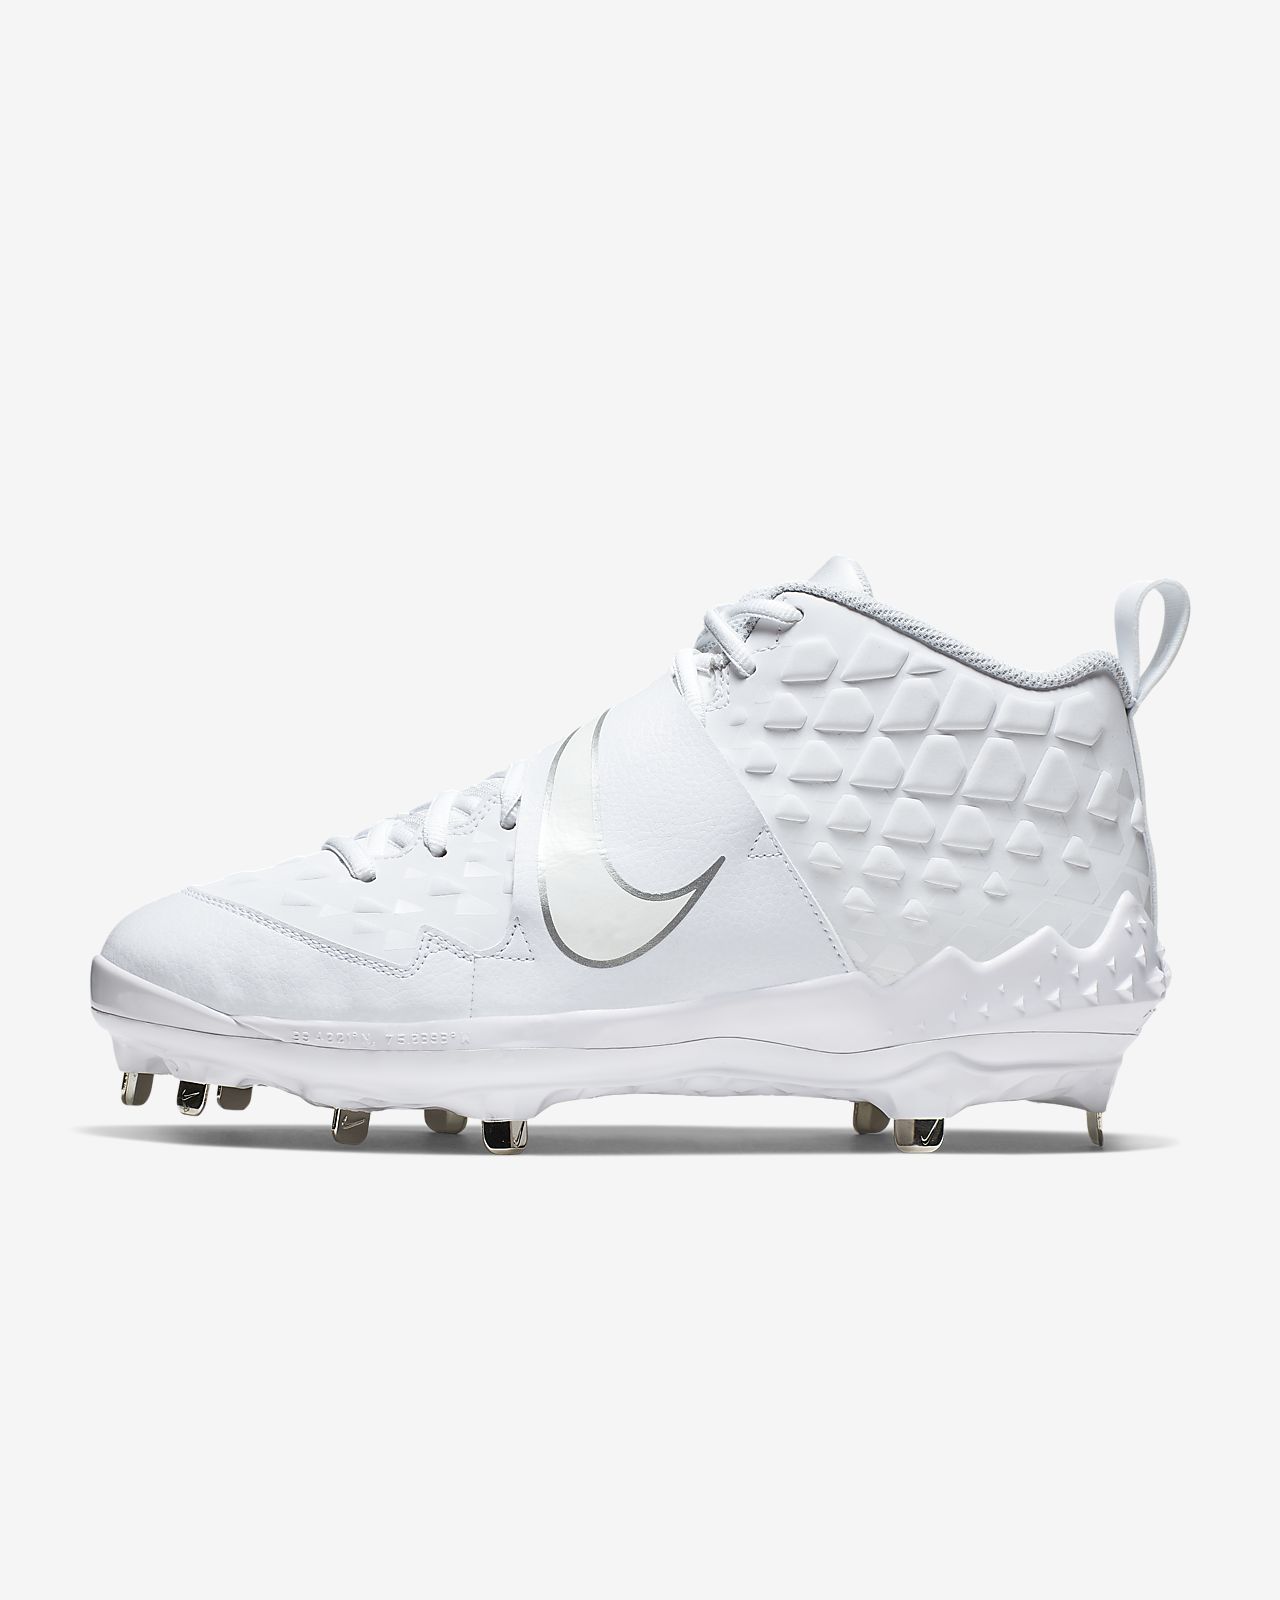 mike trout white cleats